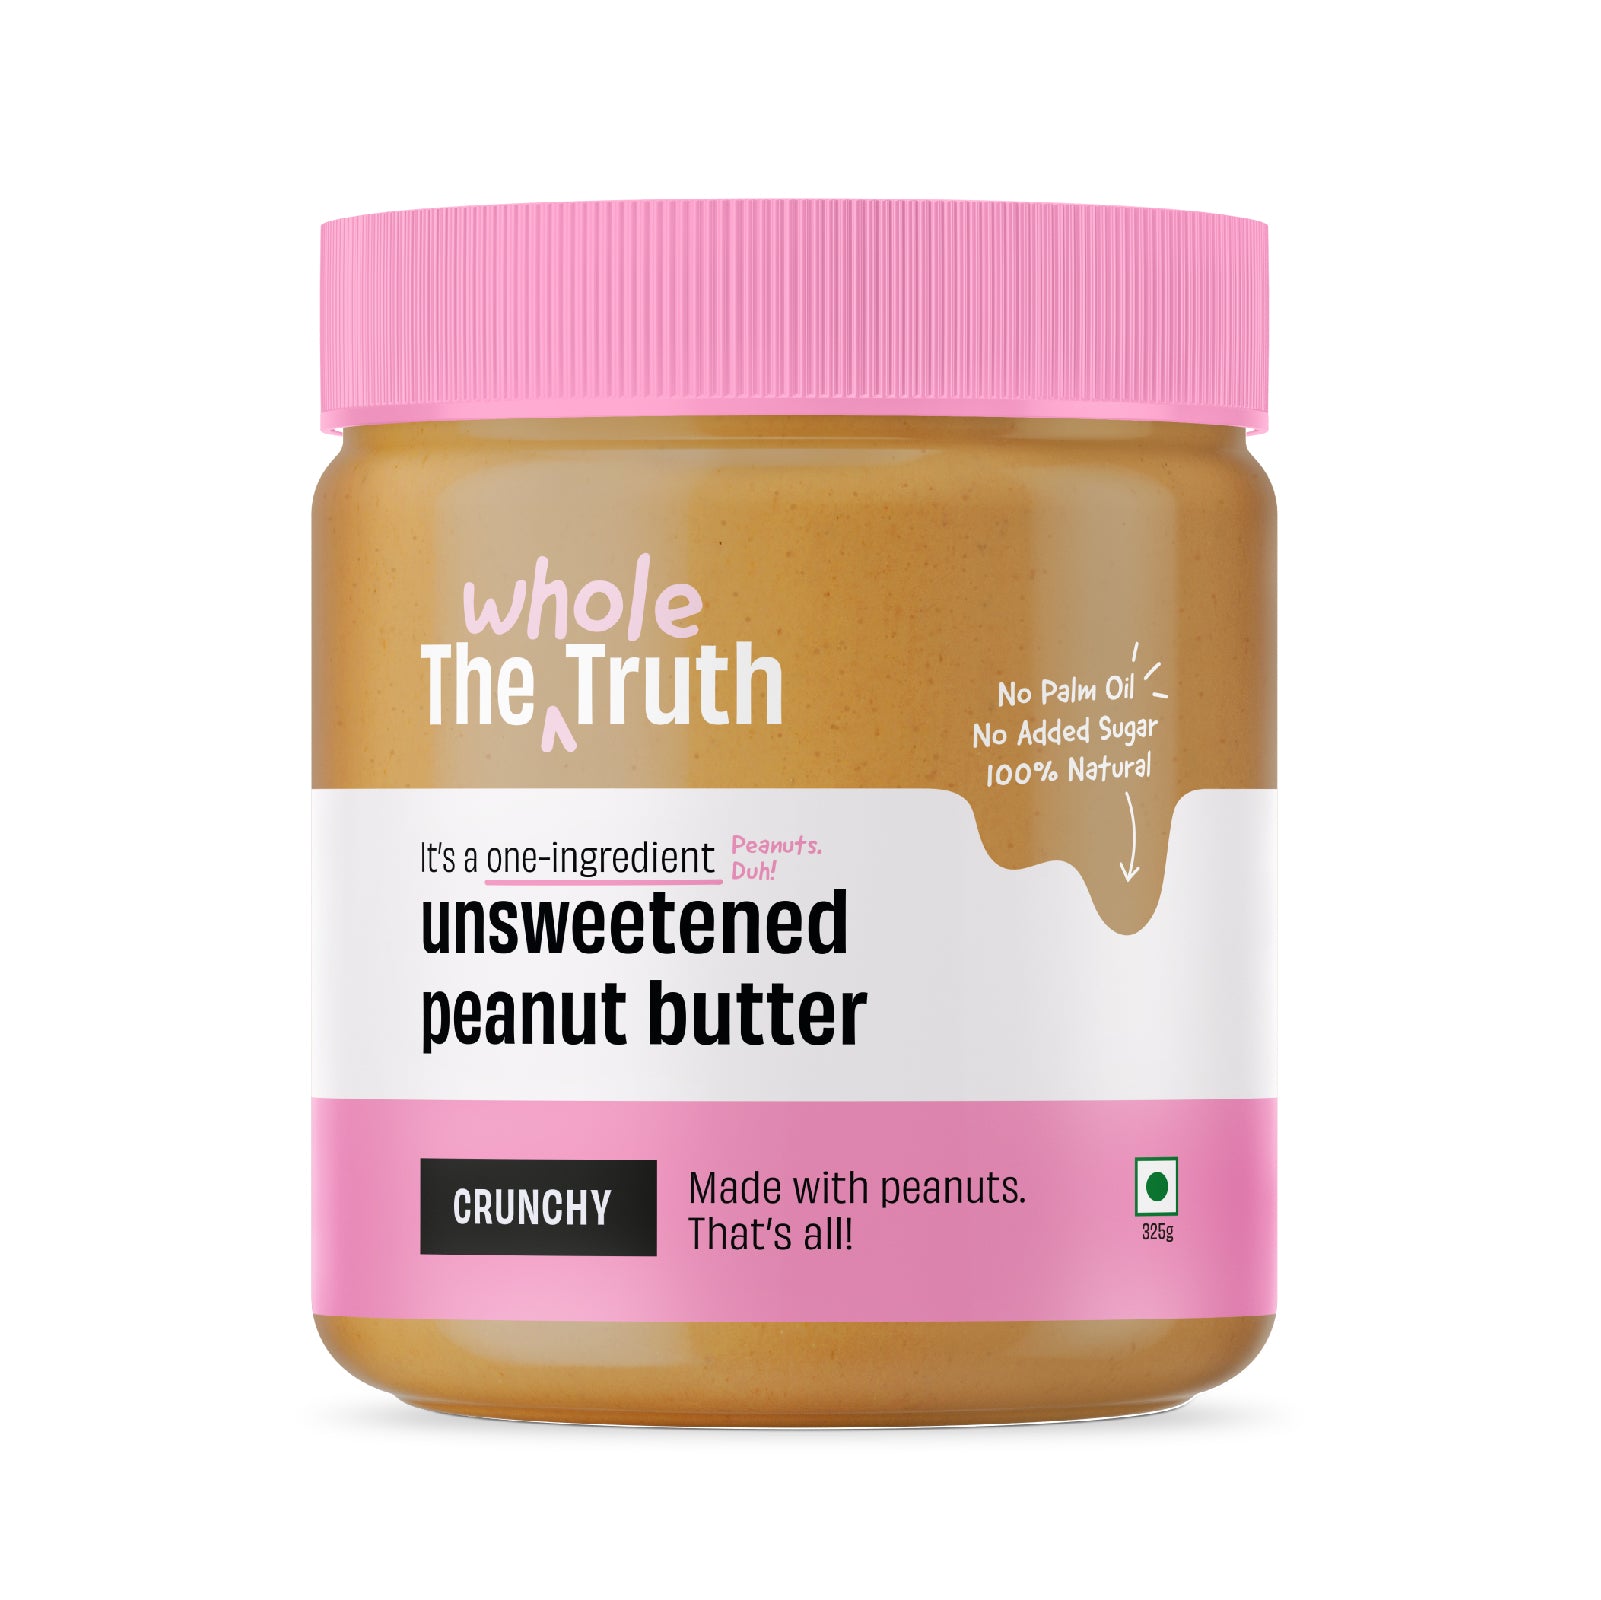 The Whole Truth - Unsweetened Peanut Butter - Crunchy | No Added Sugar | No Artificial Sweeteners | Vegan | No Gluten & Soy | No Preservatives | 100% Natural